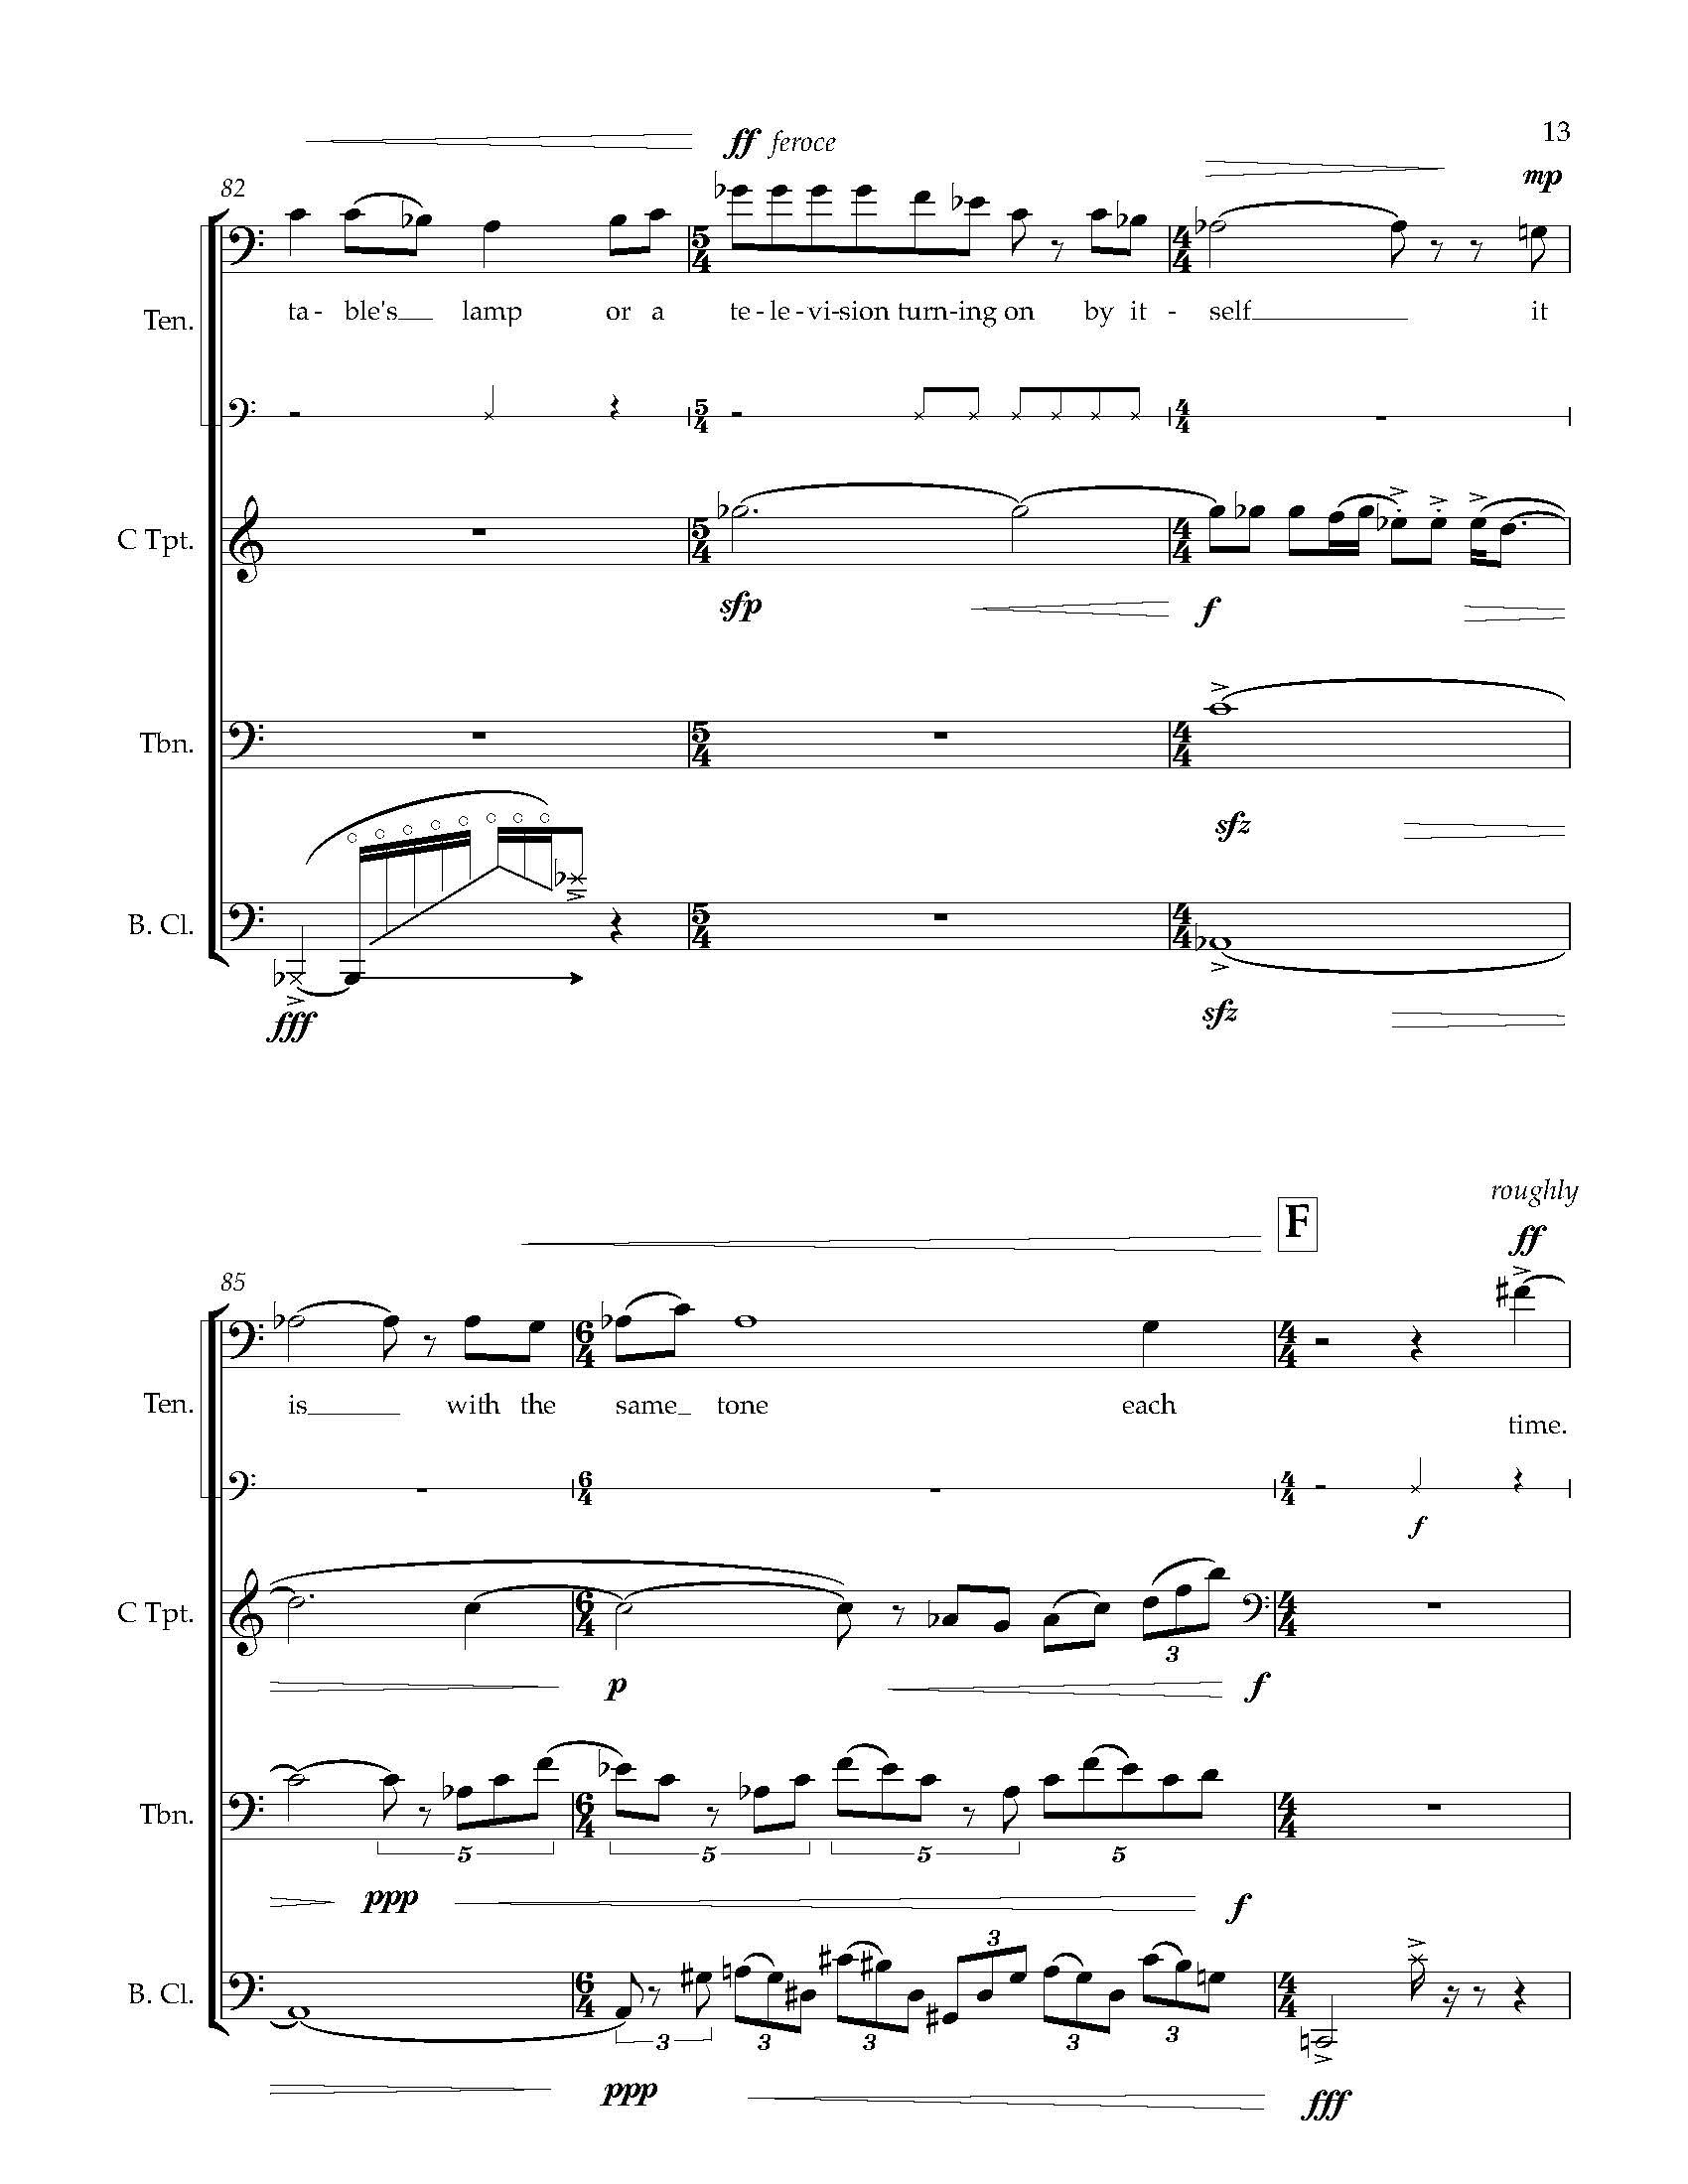 Many Worlds [1] - Complete Score_Page_22.jpg